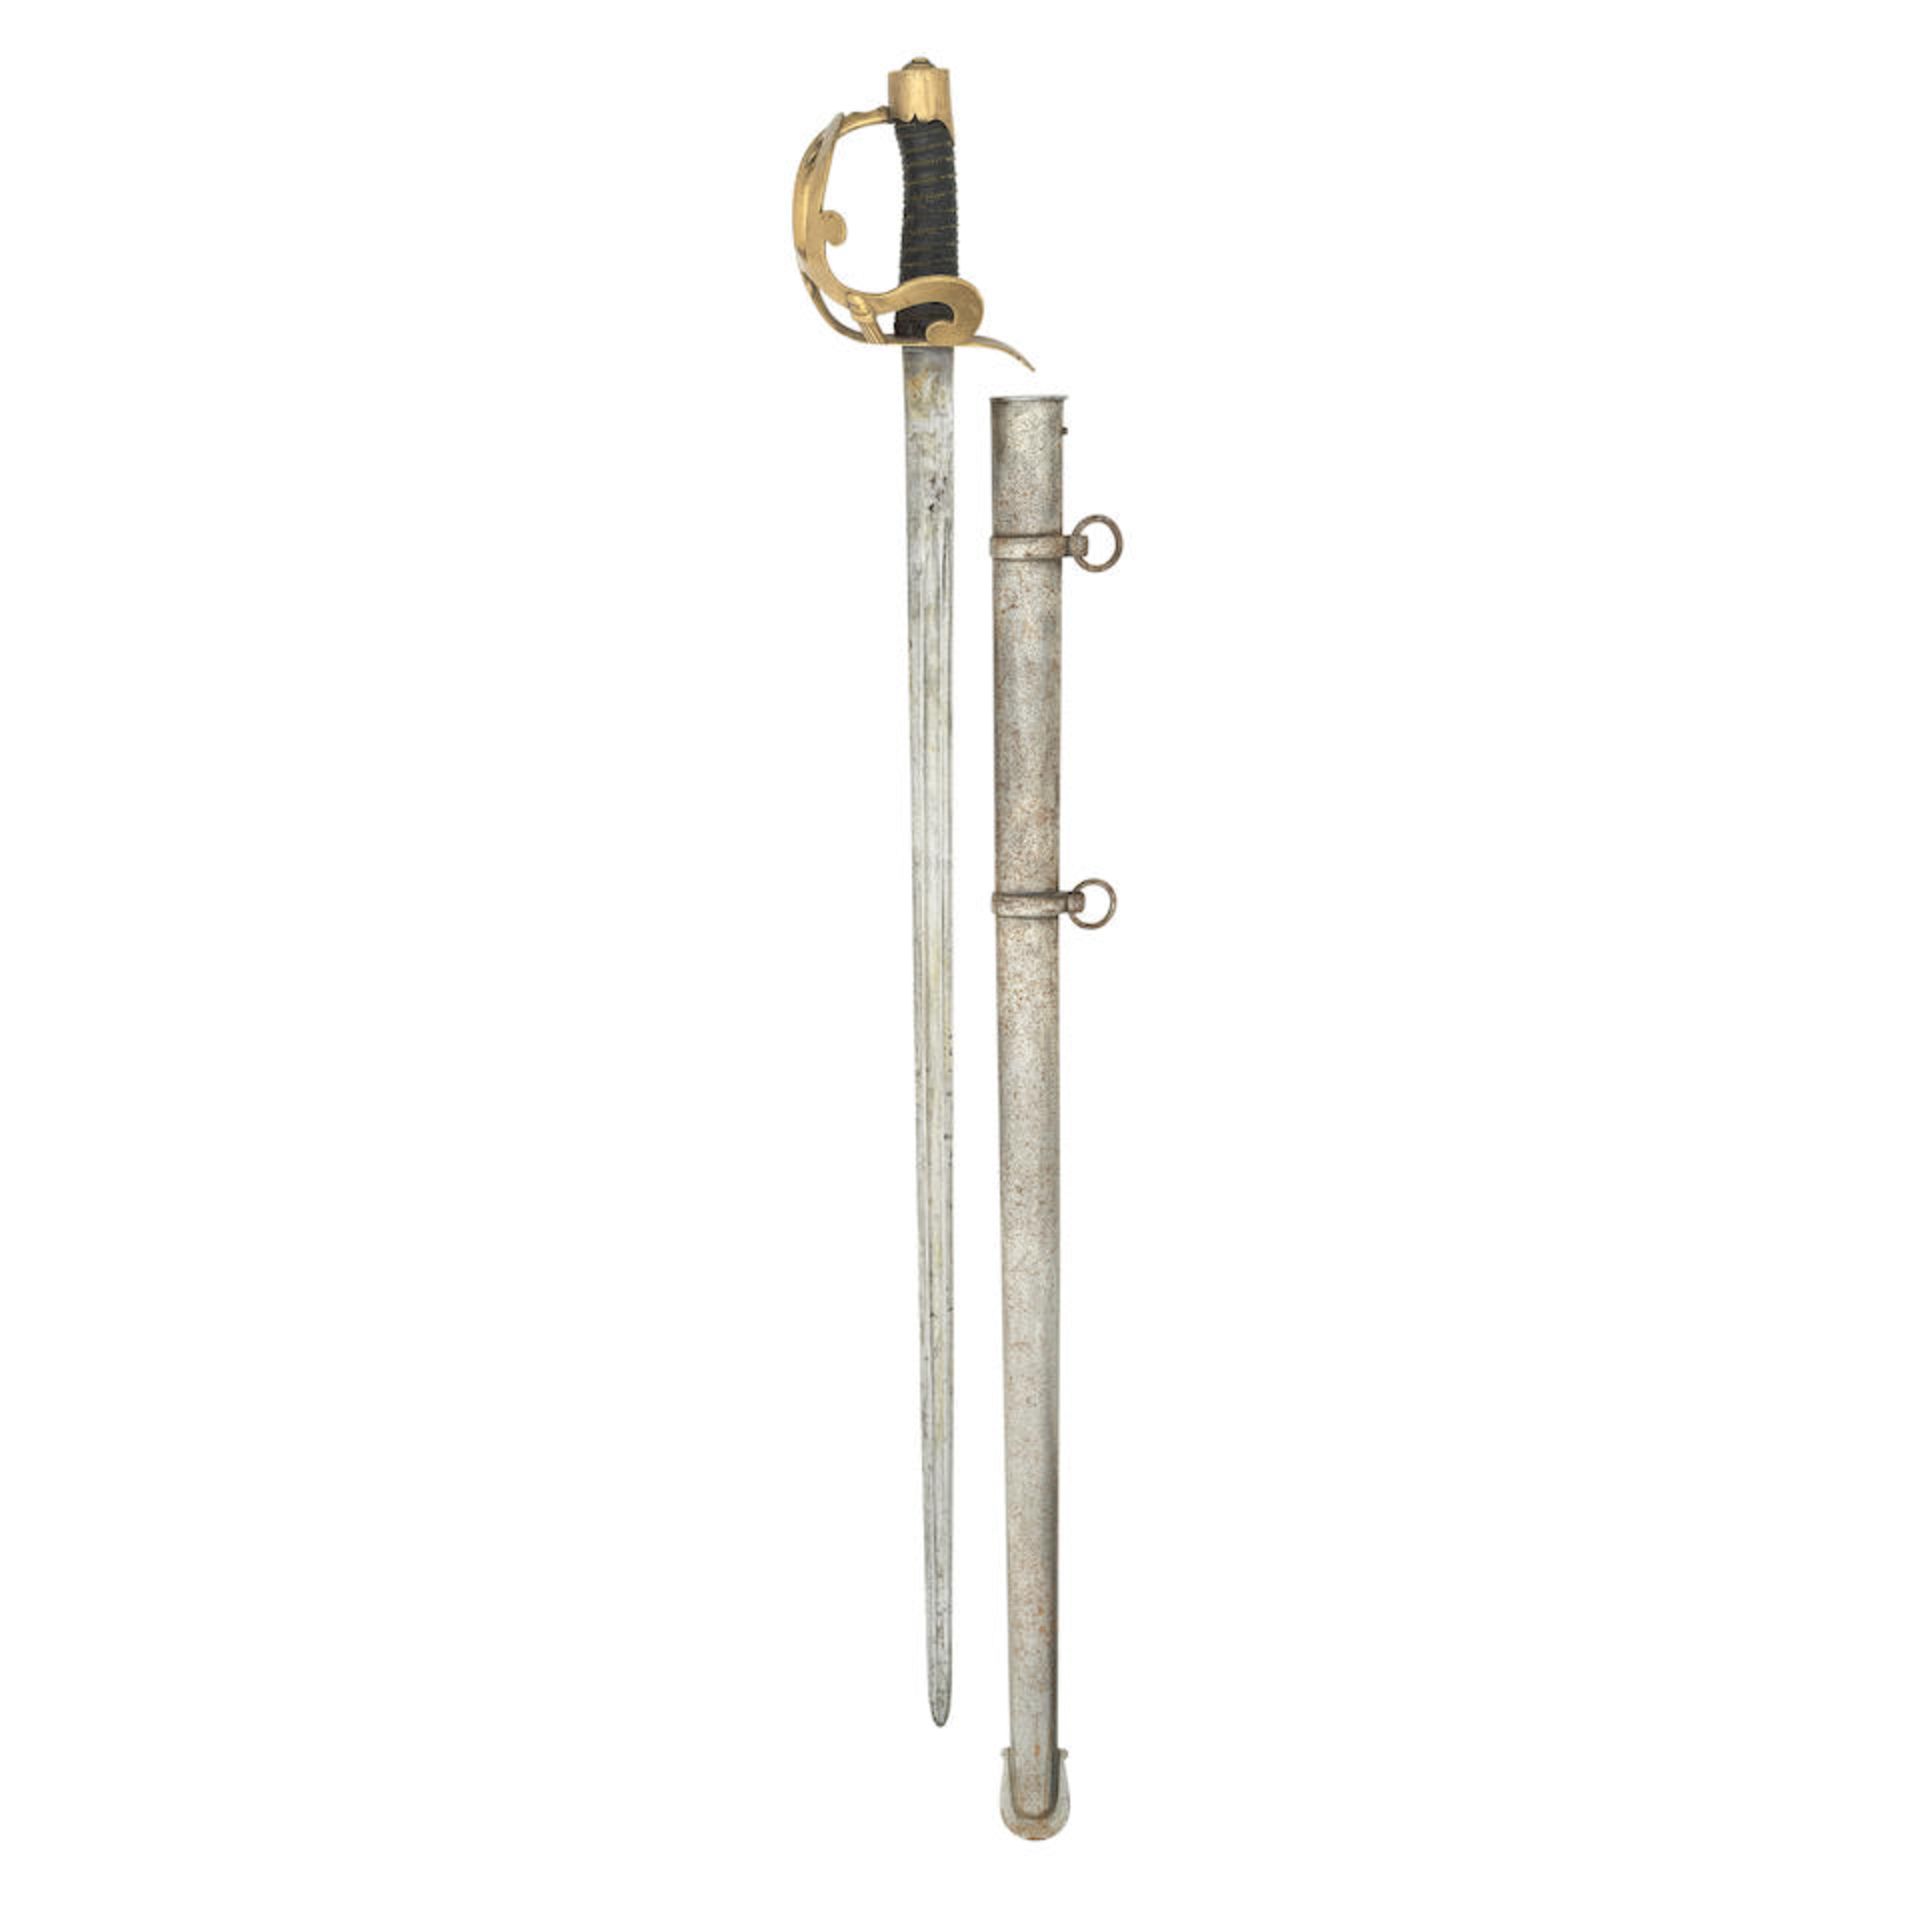 A French Revolutionary Period Heavy Cavalry Officer's Sword